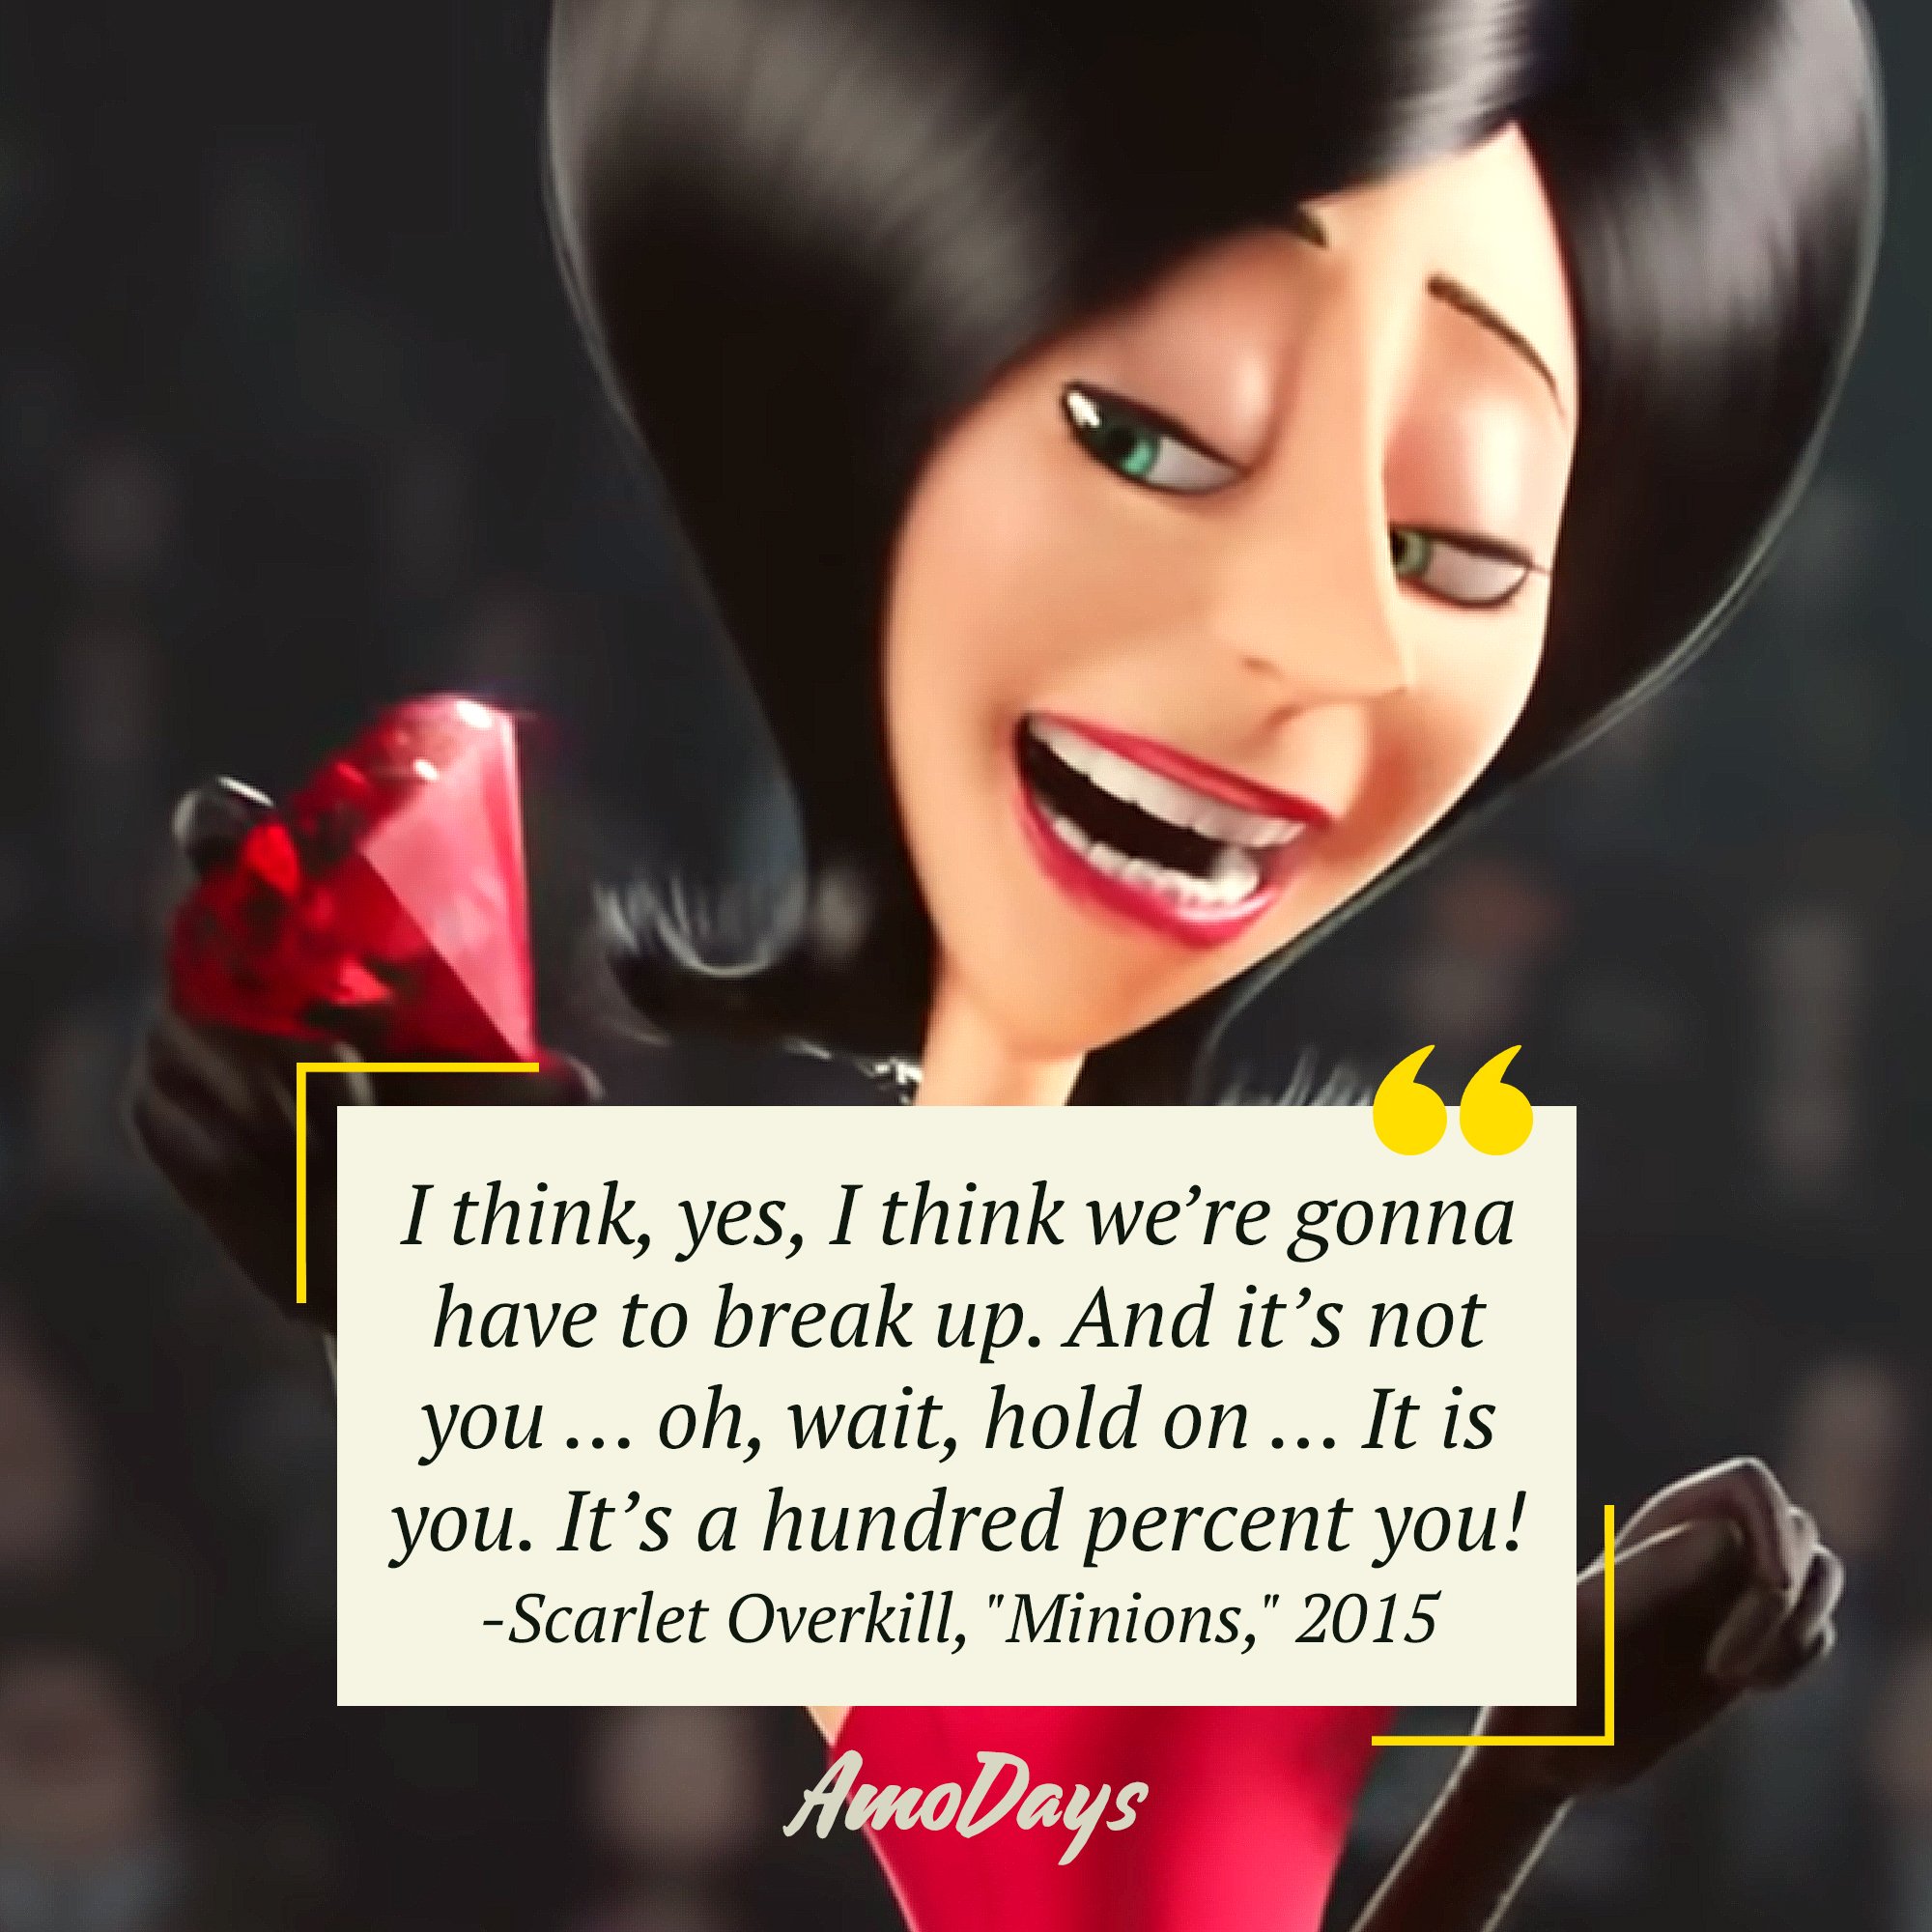 Scarlet Overkill's quote from "Minions" "I think, yes, I think we’re gonna have to break up. And it’s not you … oh, wait, hold on … It is you. It’s a hundred percent you!" | Image: AmoDays